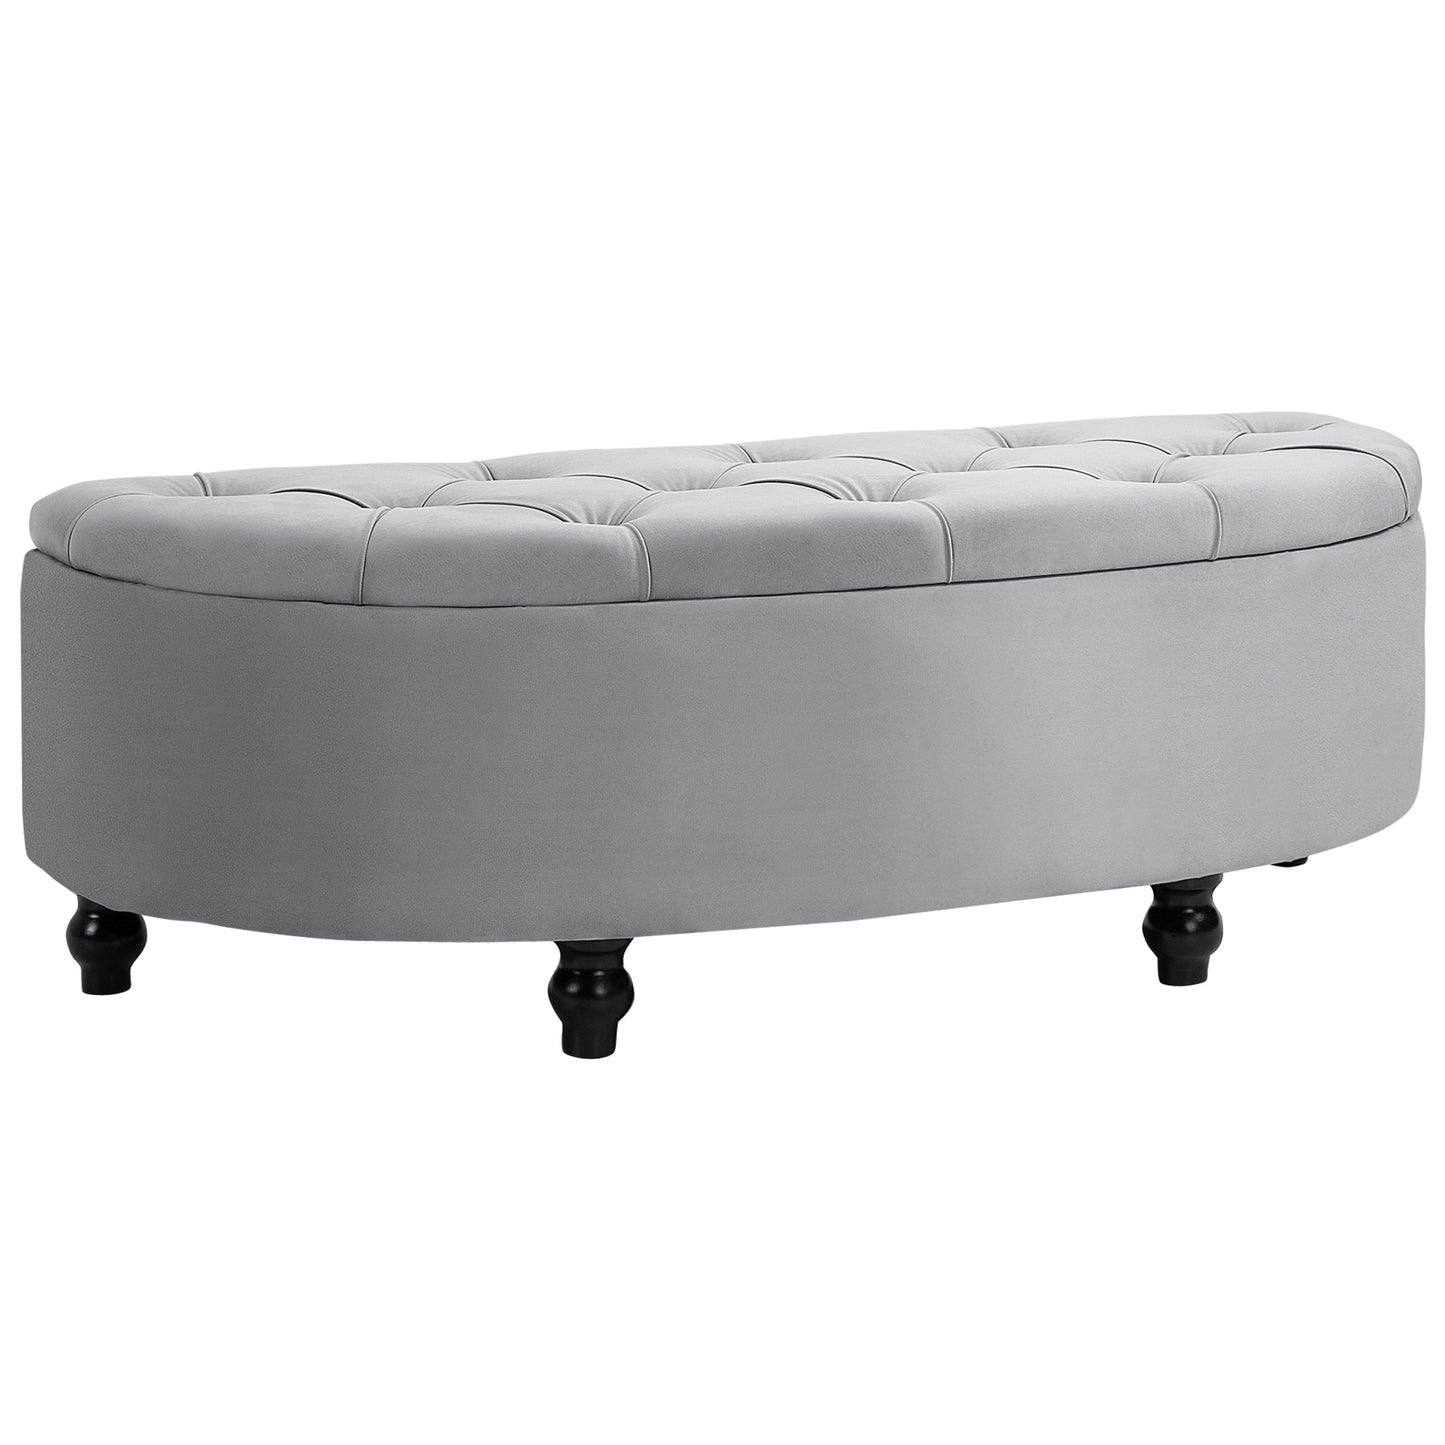 HOMCOM Storage Ottoman Bench Tufted Upholstered Footrest Stool with Rubberwood Legs